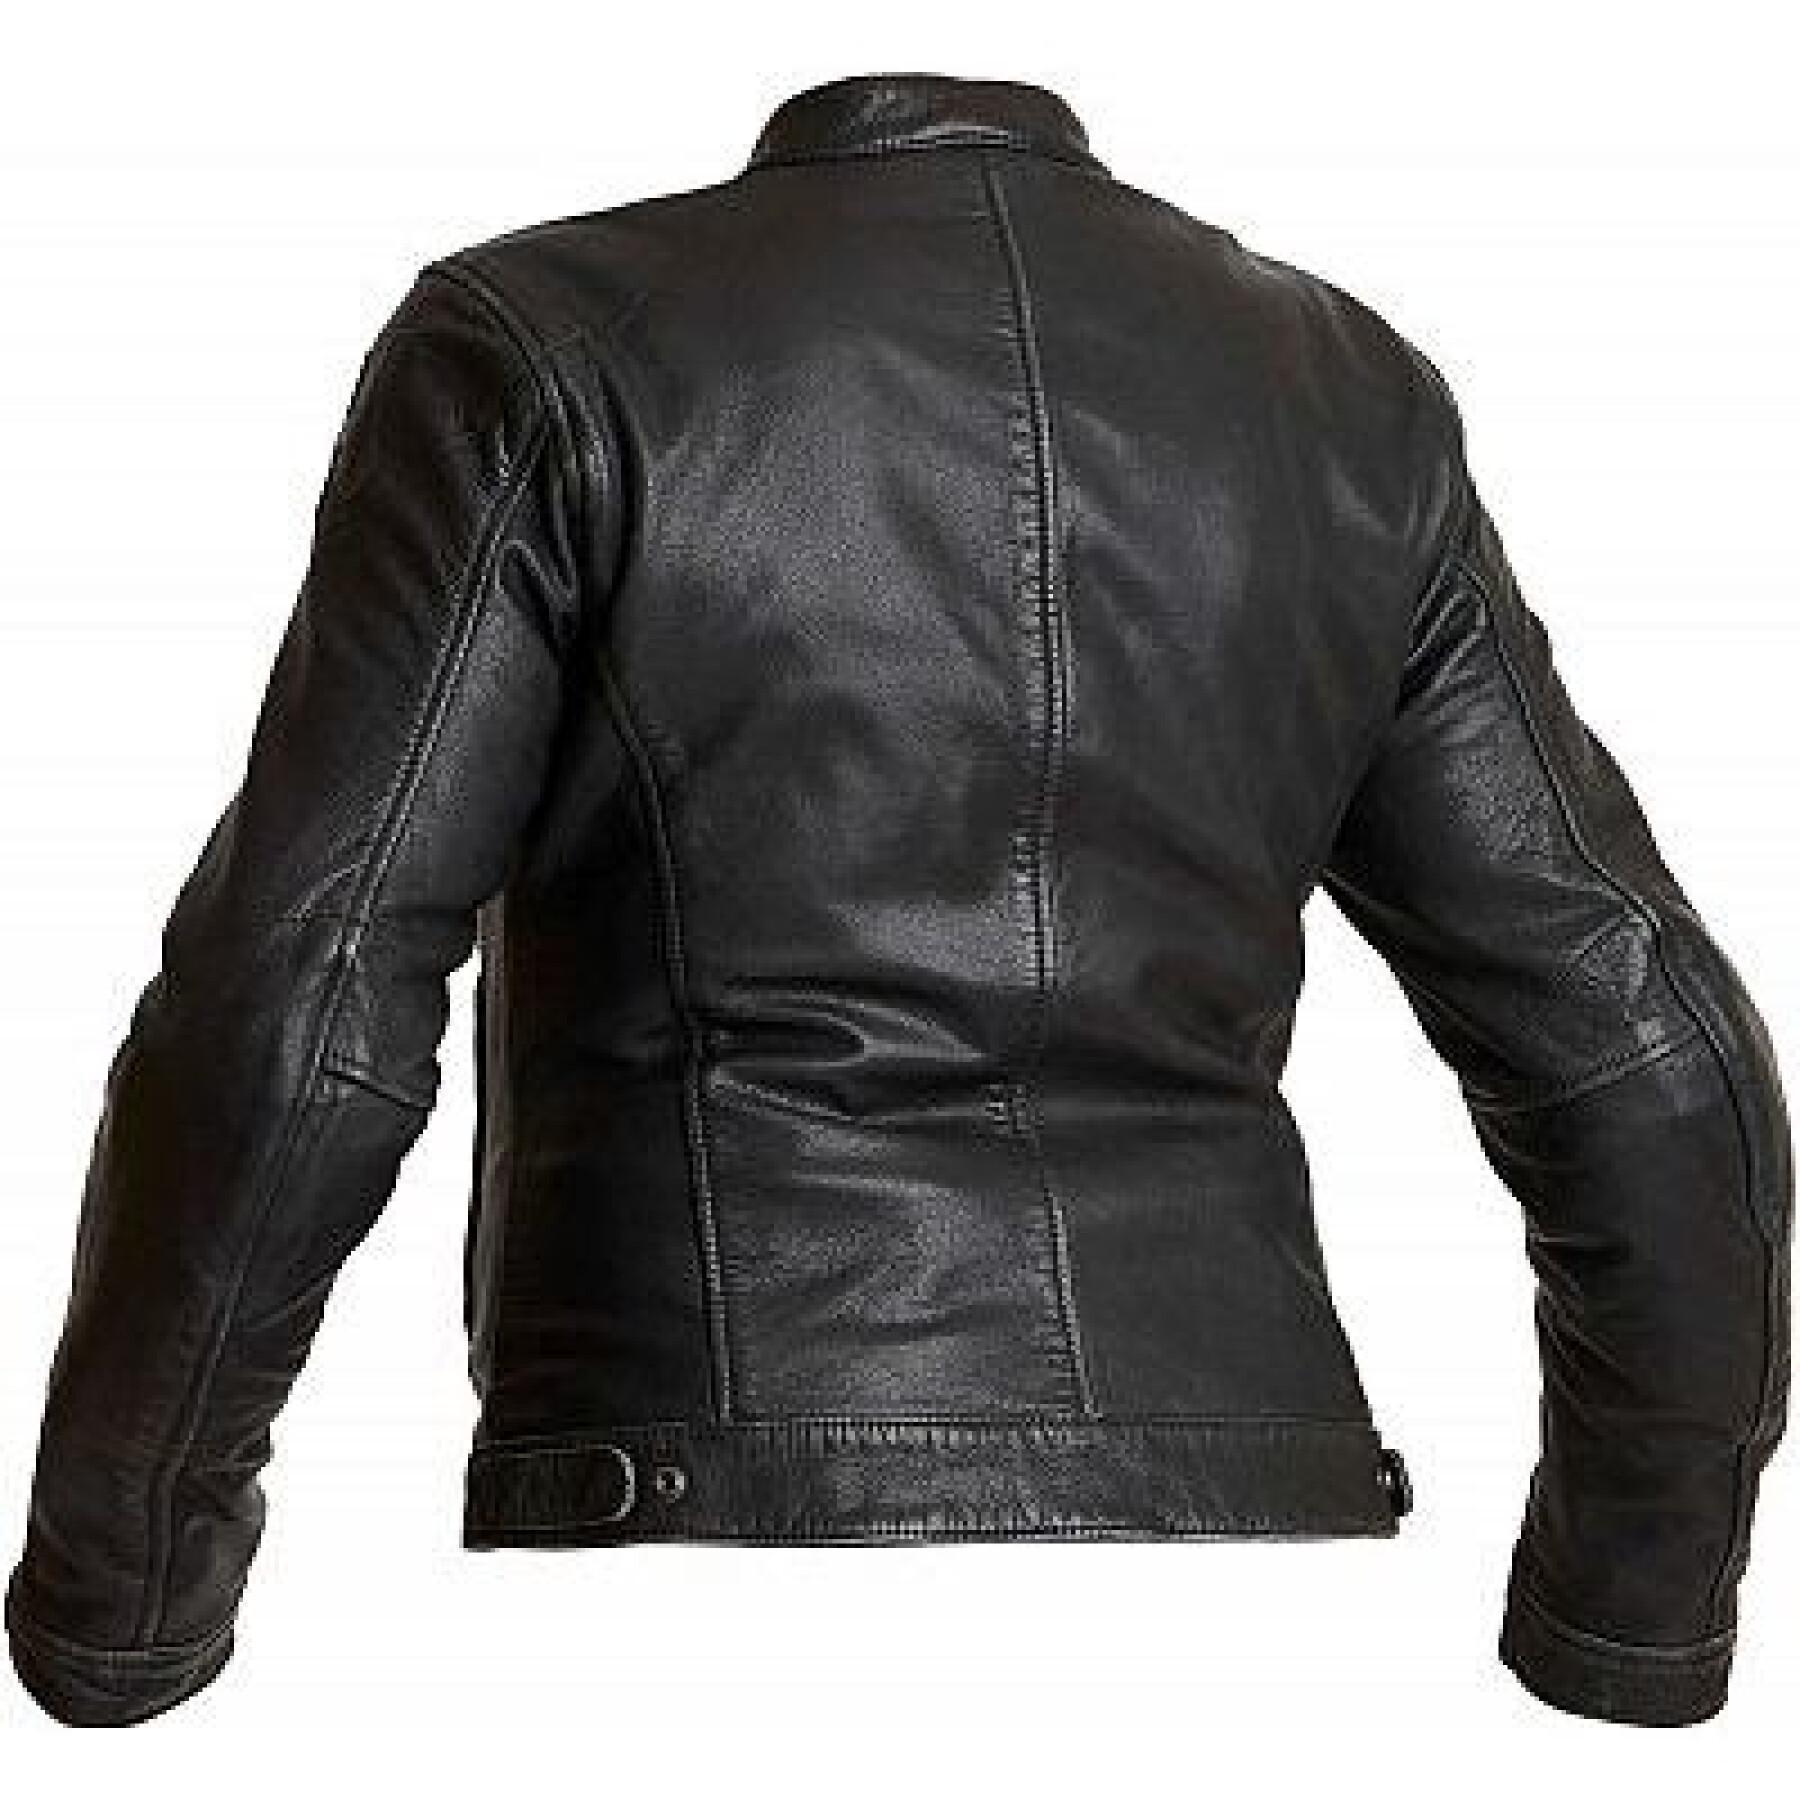 Leather motorcycle jacket for women Halvarssons Orsa